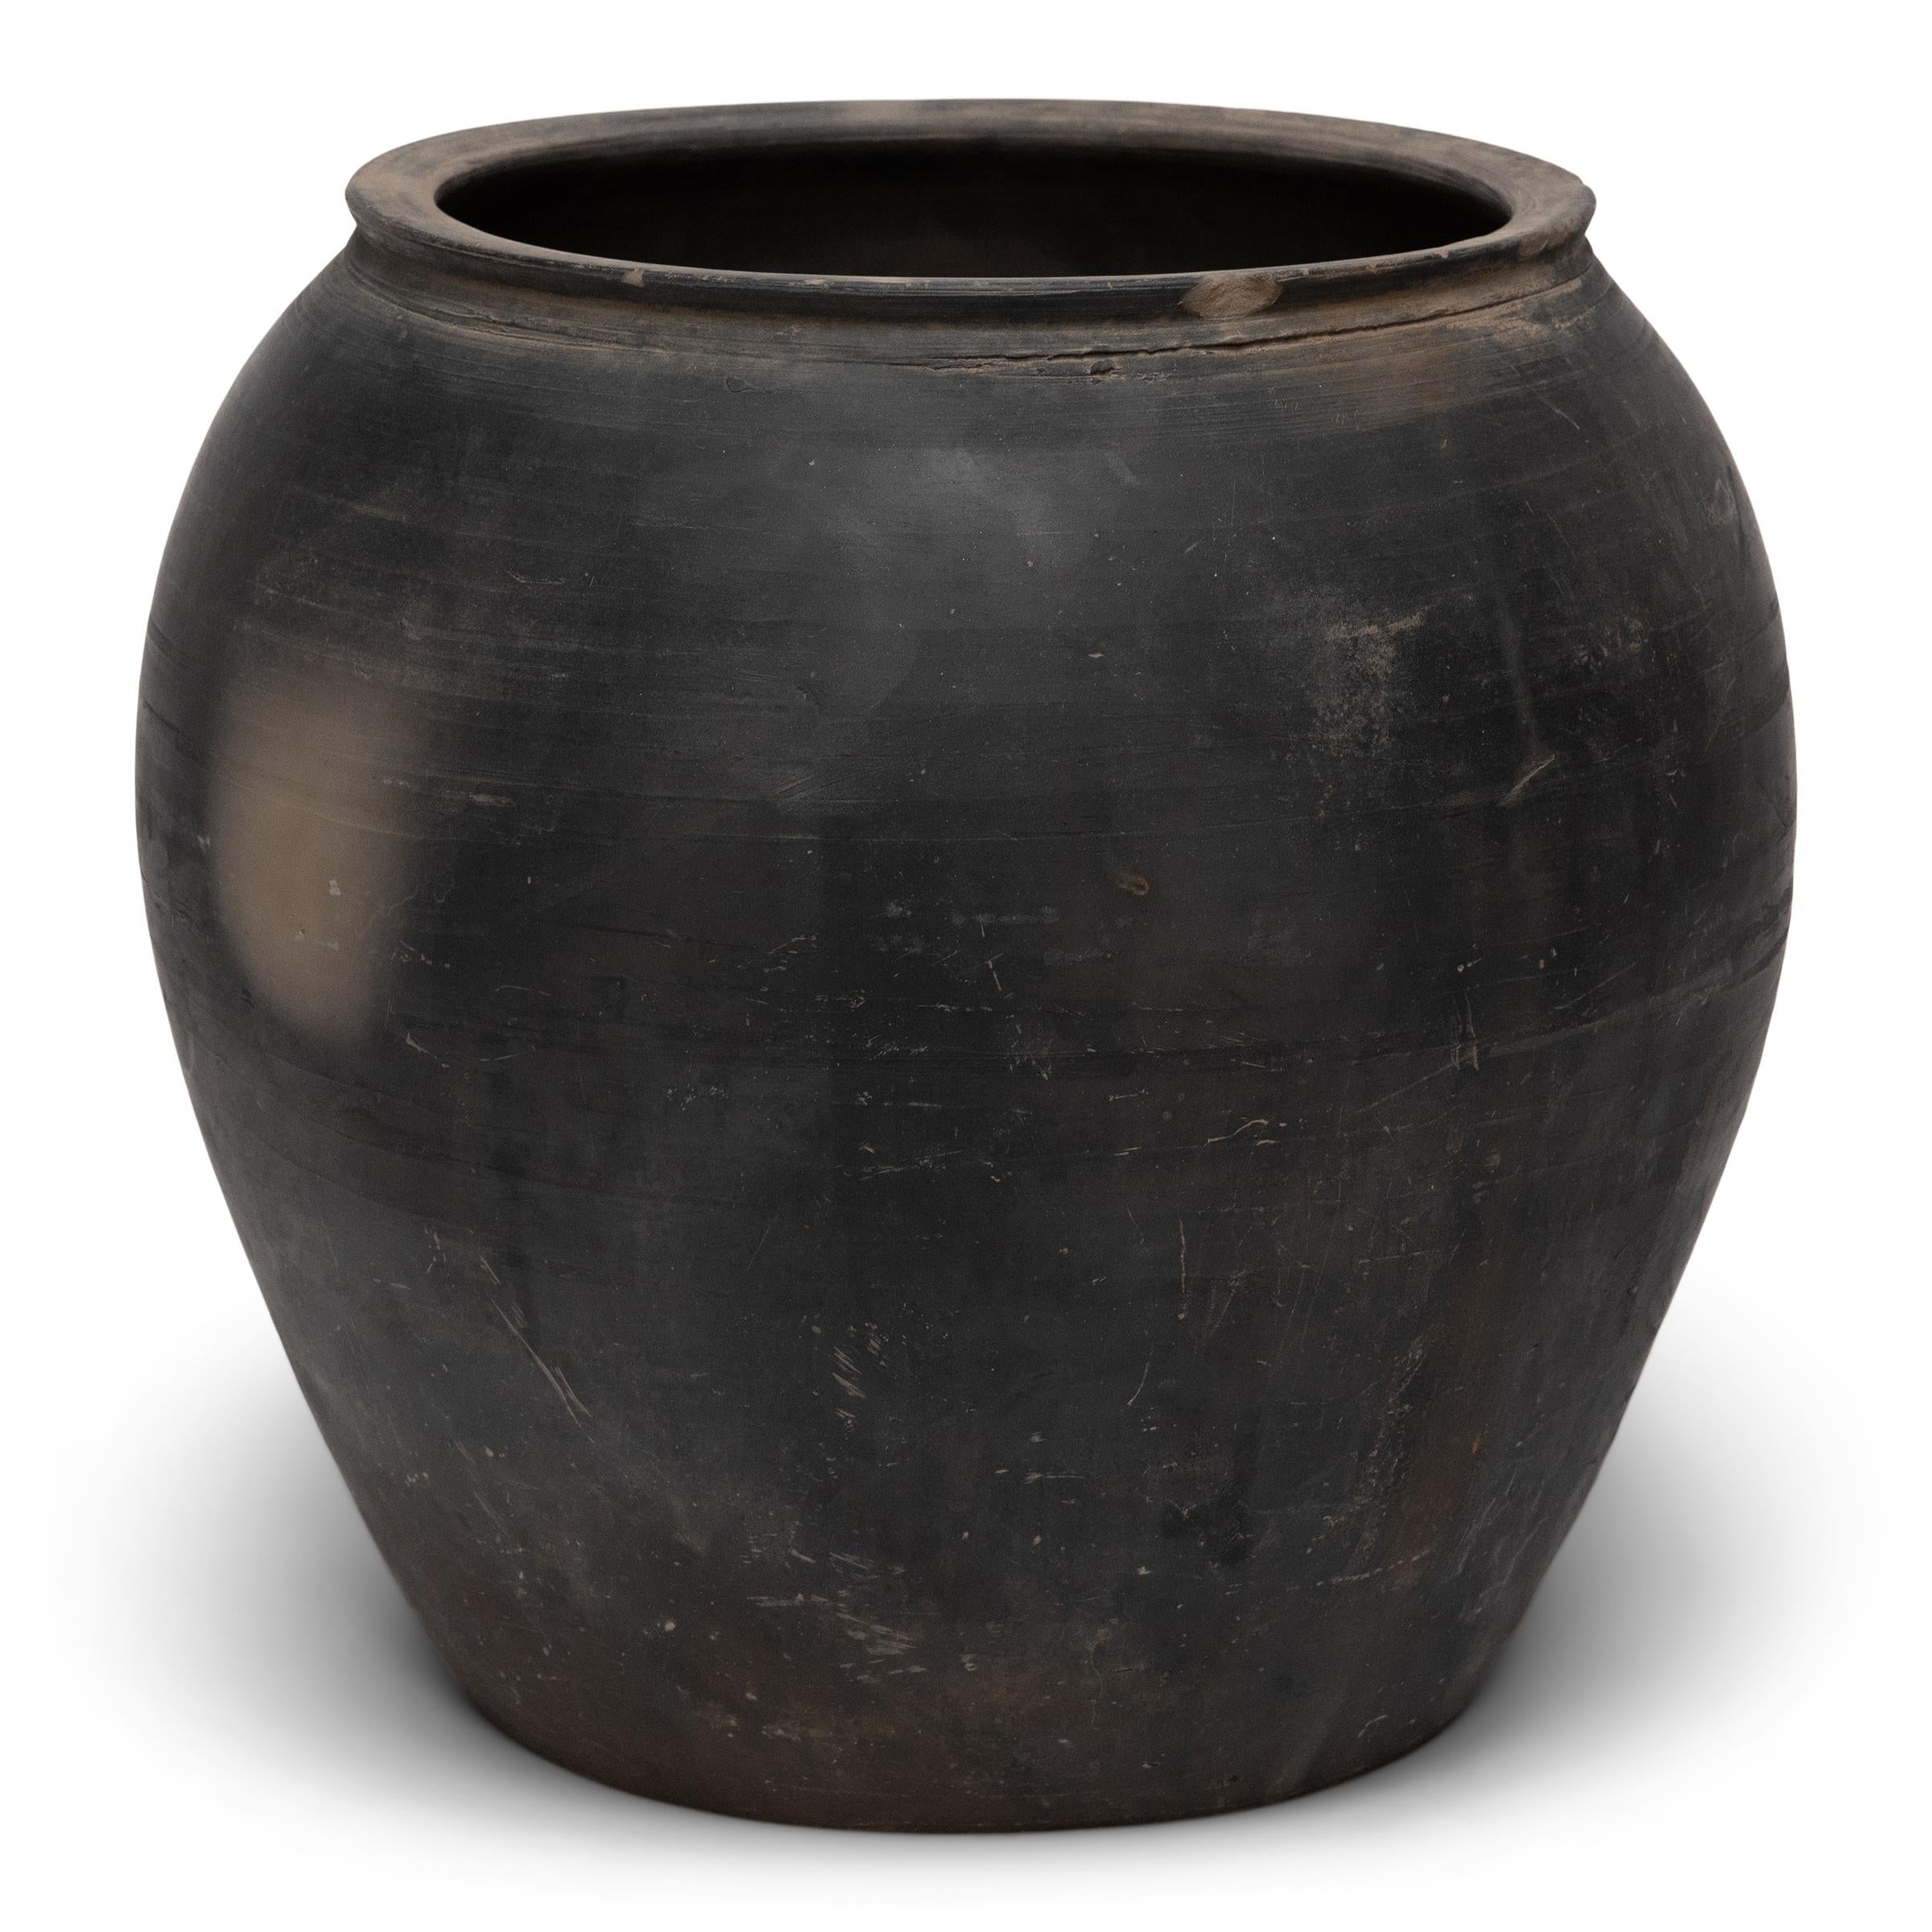 Sculpted during the early 20th century in China's Shanxi province, this terra cotta vessel has a smoky taupe-black exterior with balanced proportions and a beautifully irregular unglazed surface. Charged with the humble task of storing dry goods,